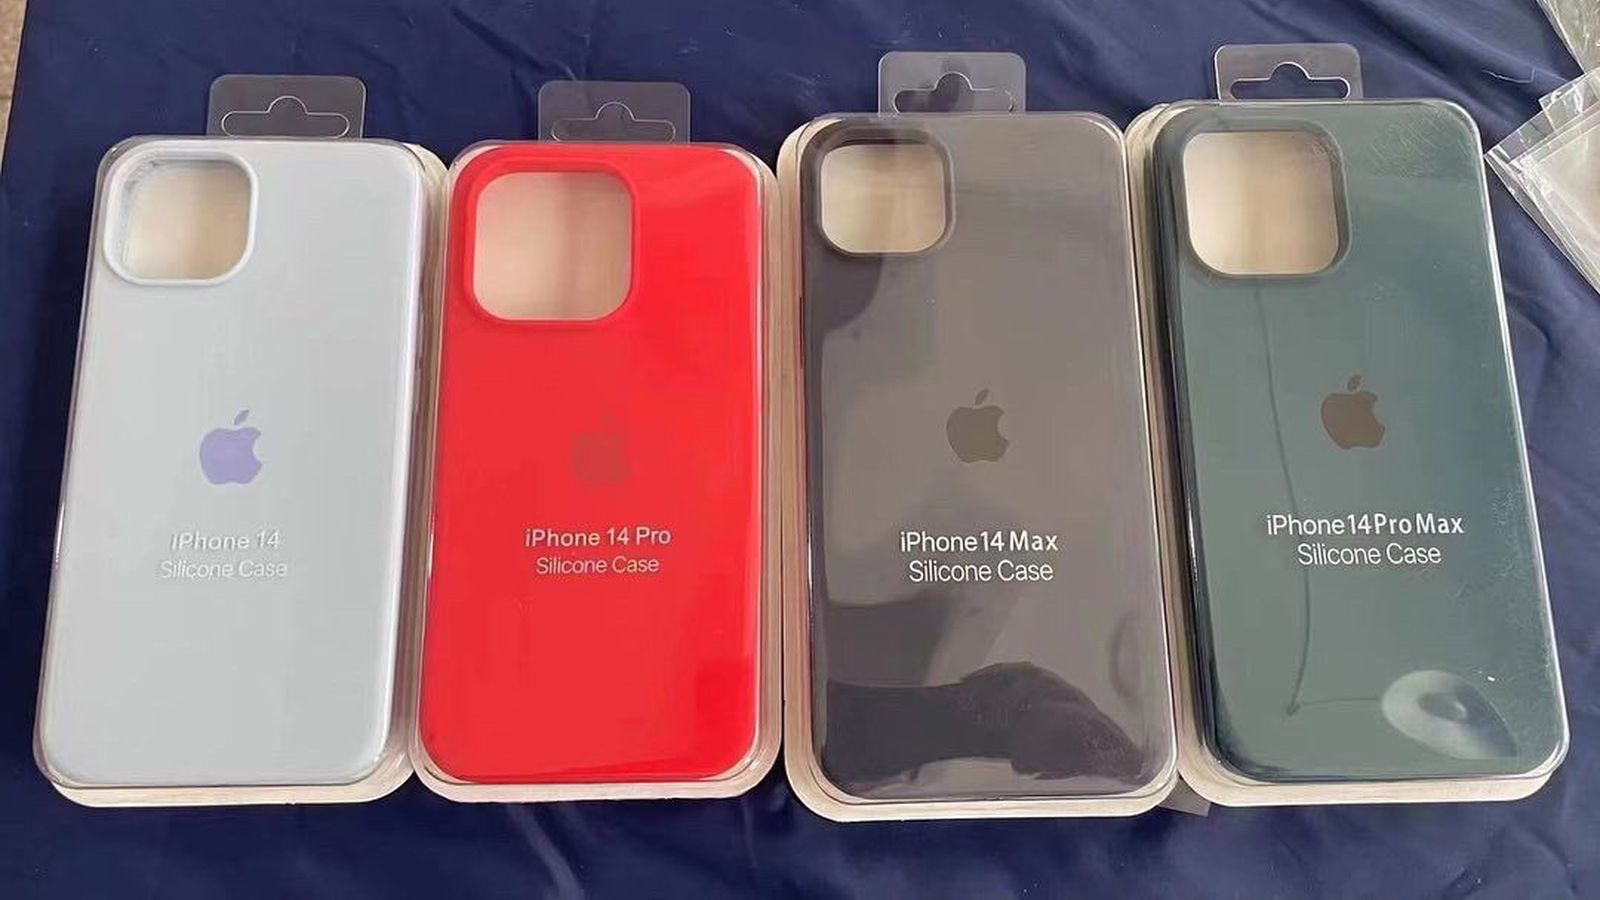 I BOUGHT FAKE DESIGNER IPHONE 11 PRO MAX CASES FROM ! 